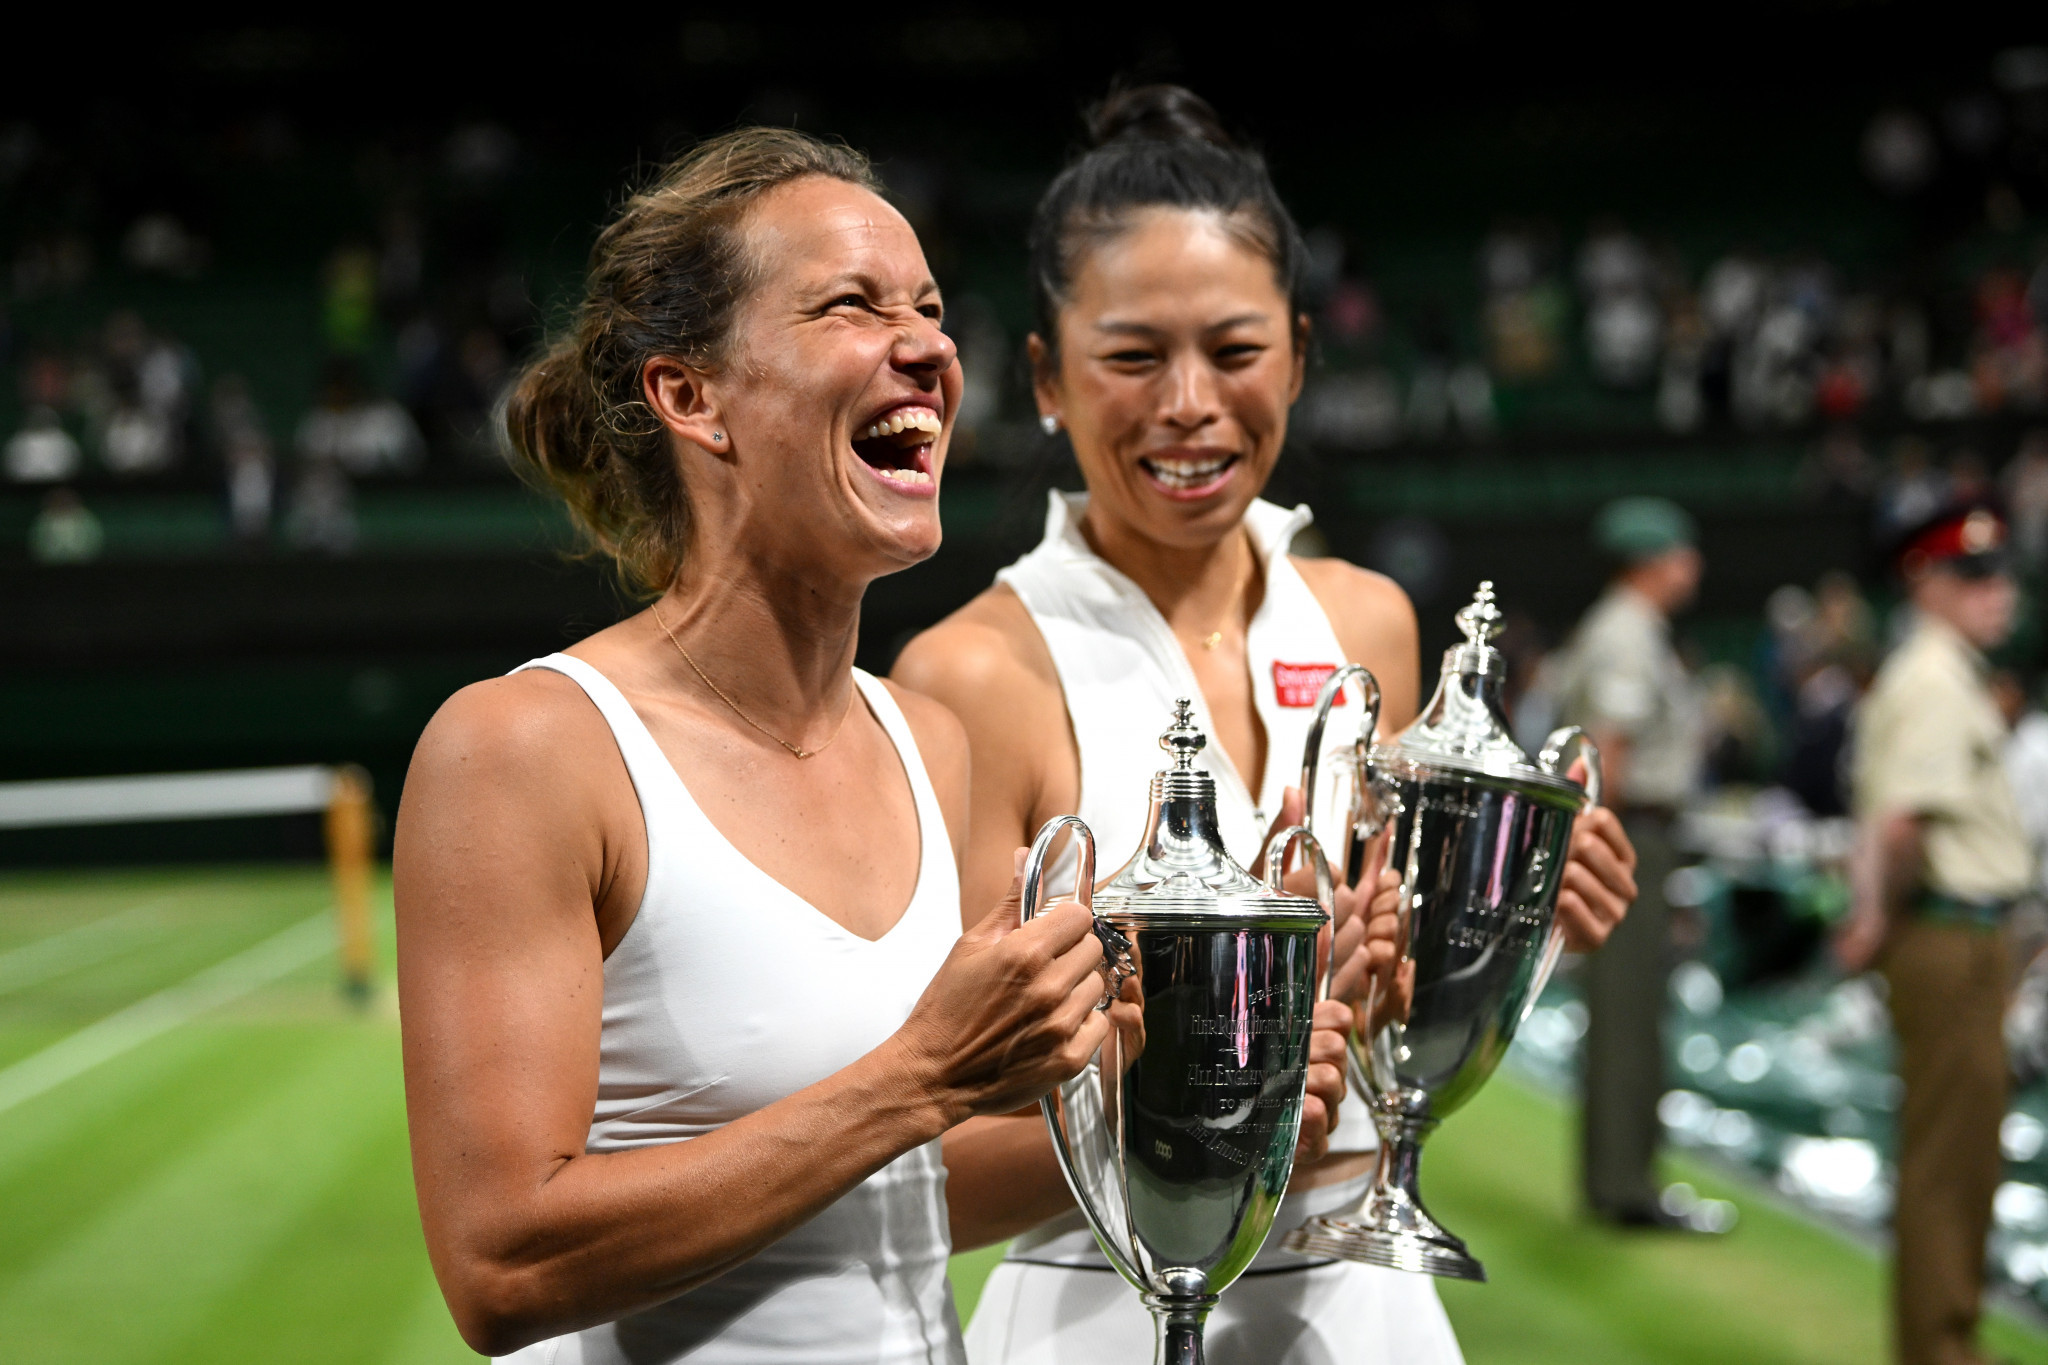 Strýcová ends Wimbledon career by winning women's doubles crown with Hsieh